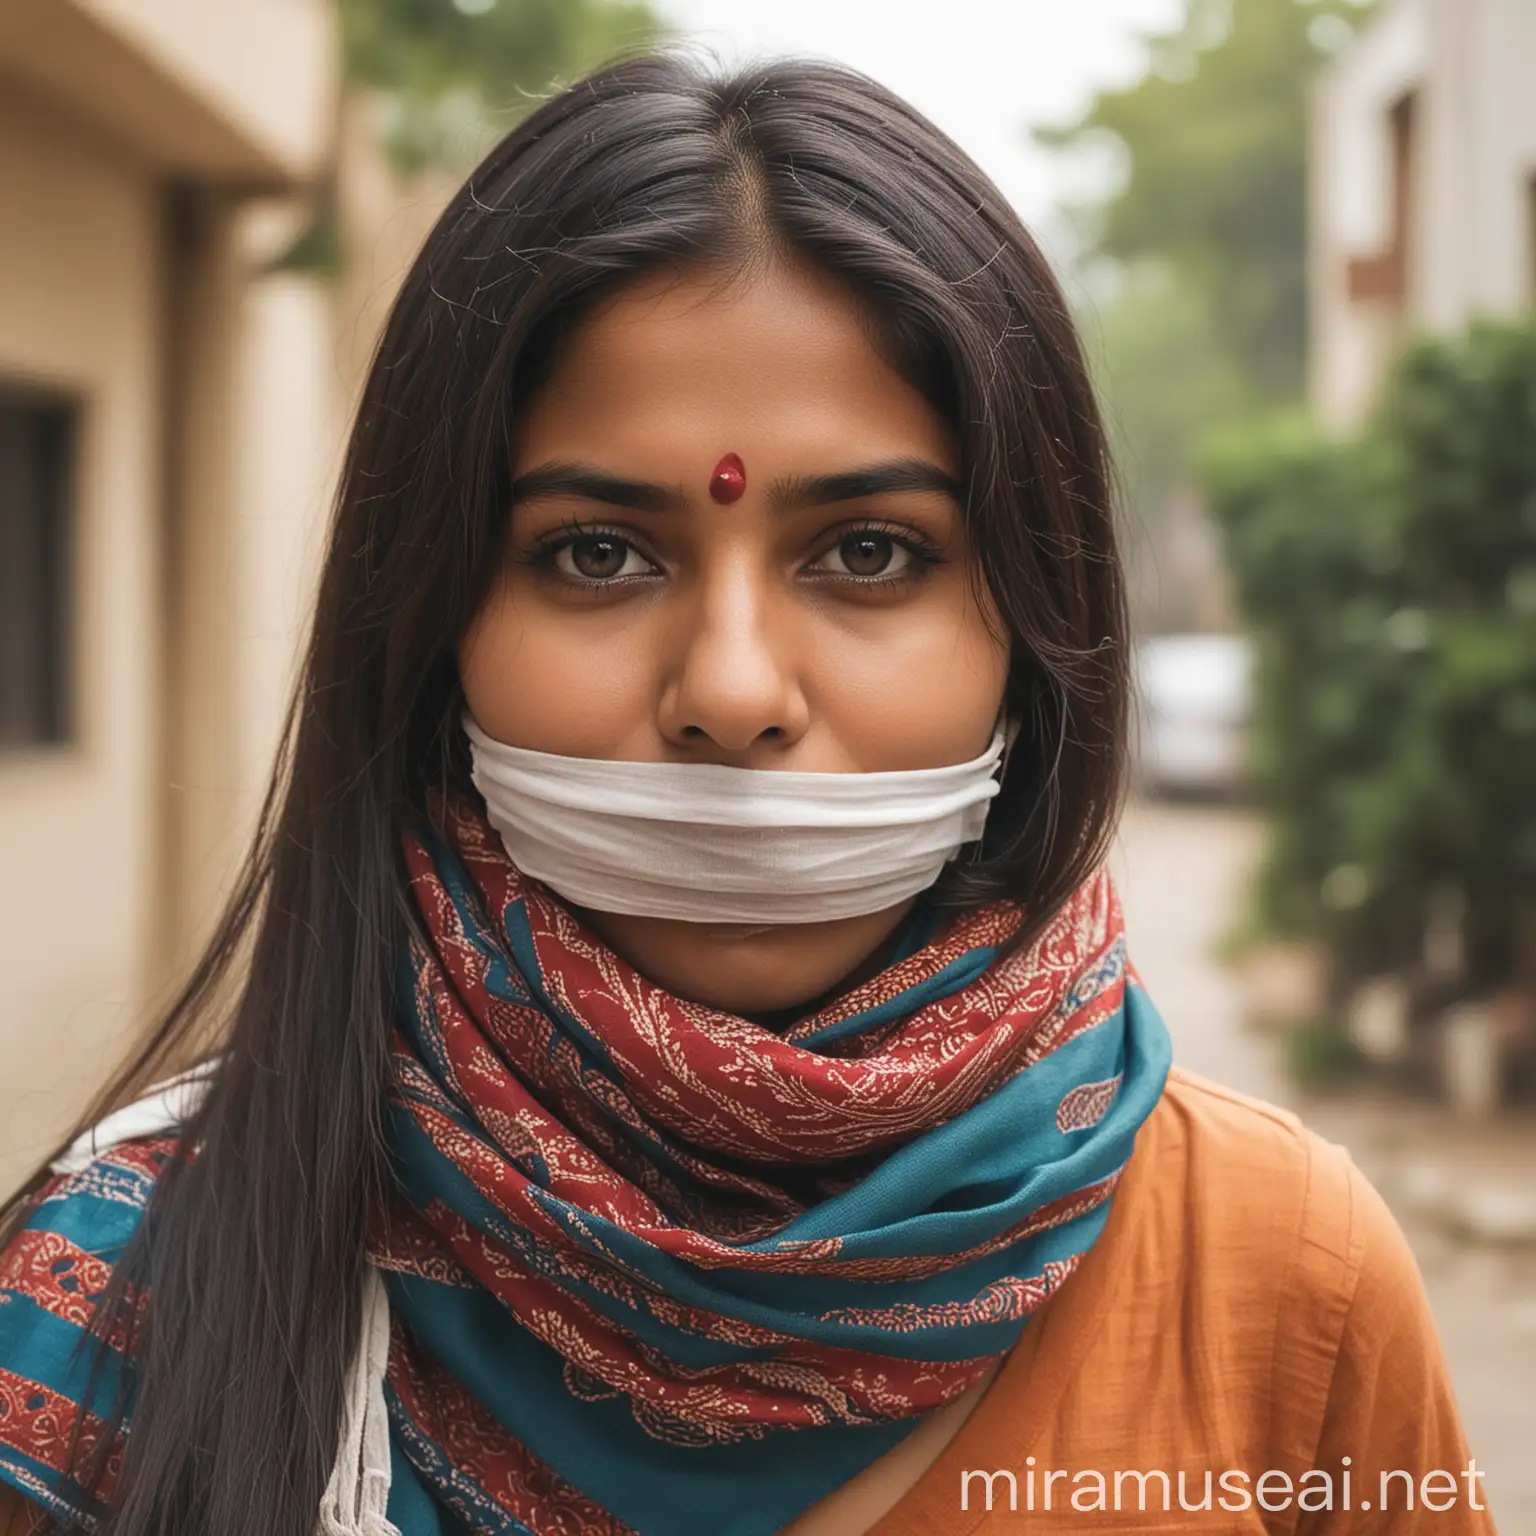 Silenced Indian Girl Restrained with Scarf